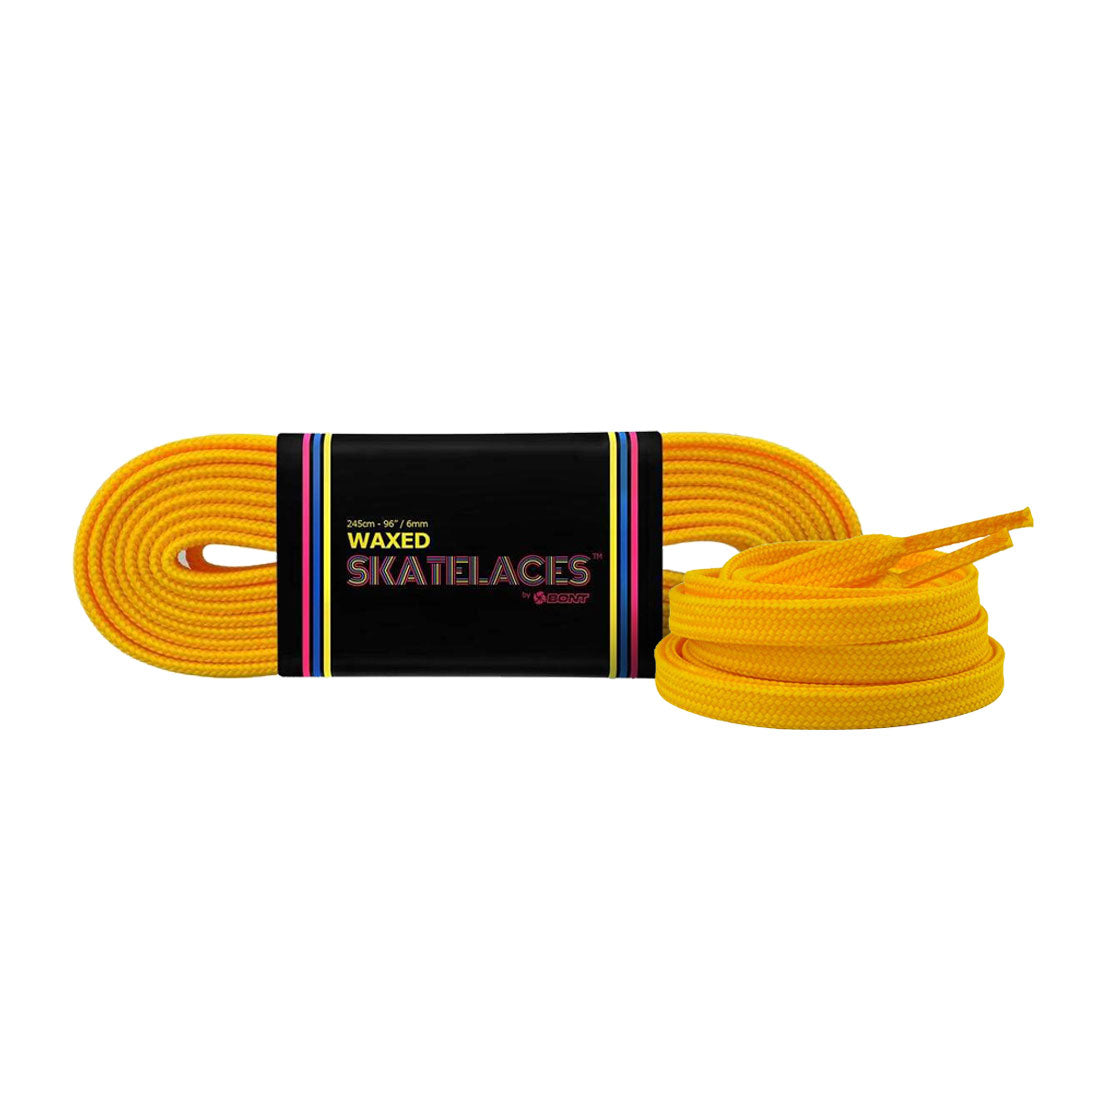 Bont Waxed 8mm Laces - 200cm/79in Bumblebee Yellow Laces